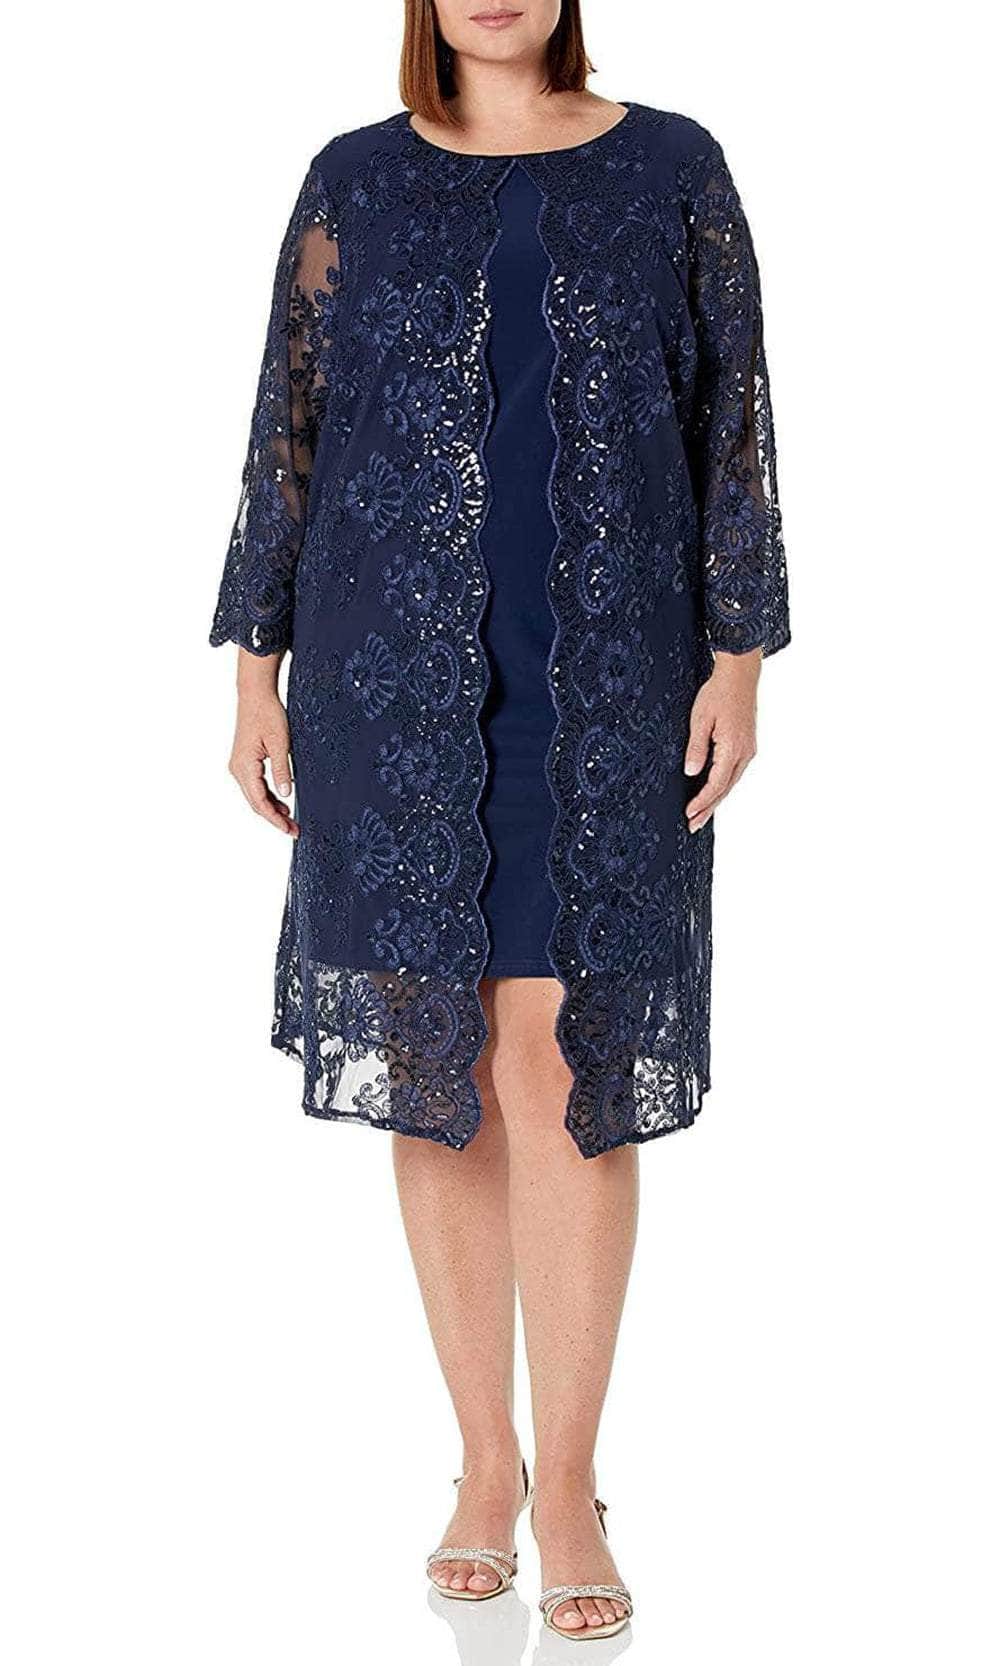 Alex Evenings 841712226 - Embroidered Mock Jacket Dress Special Occasion Dress 14W / Smoke